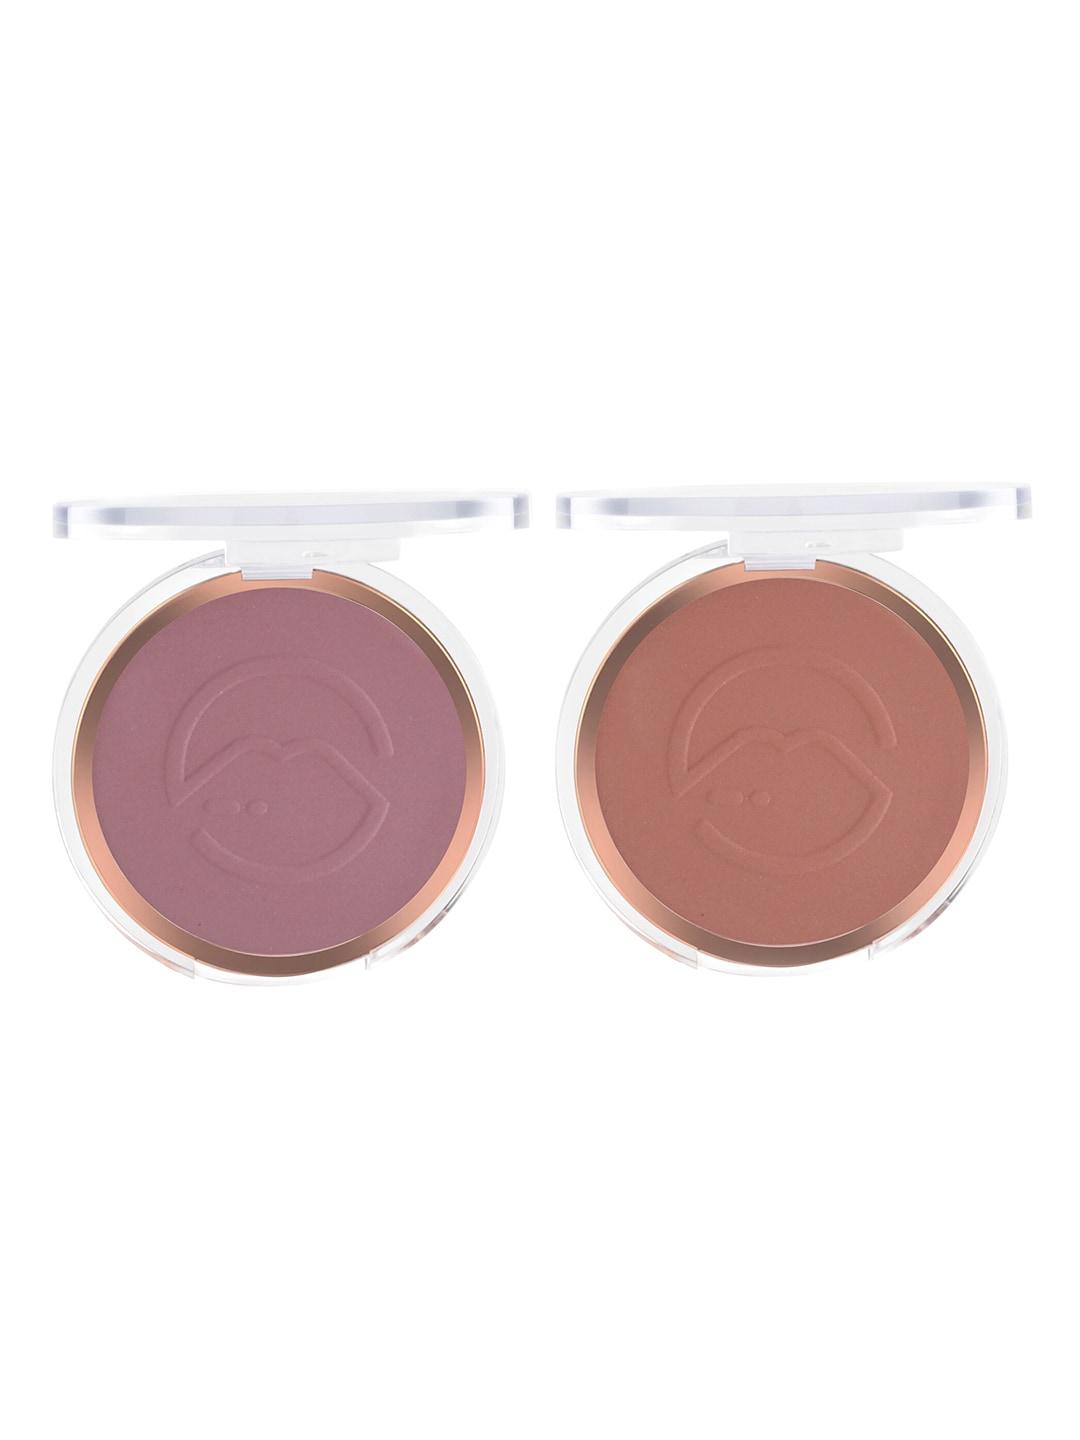 mars set of 2 flush of love highly pigmented matte blushers 16g - shade 02 & shade 03